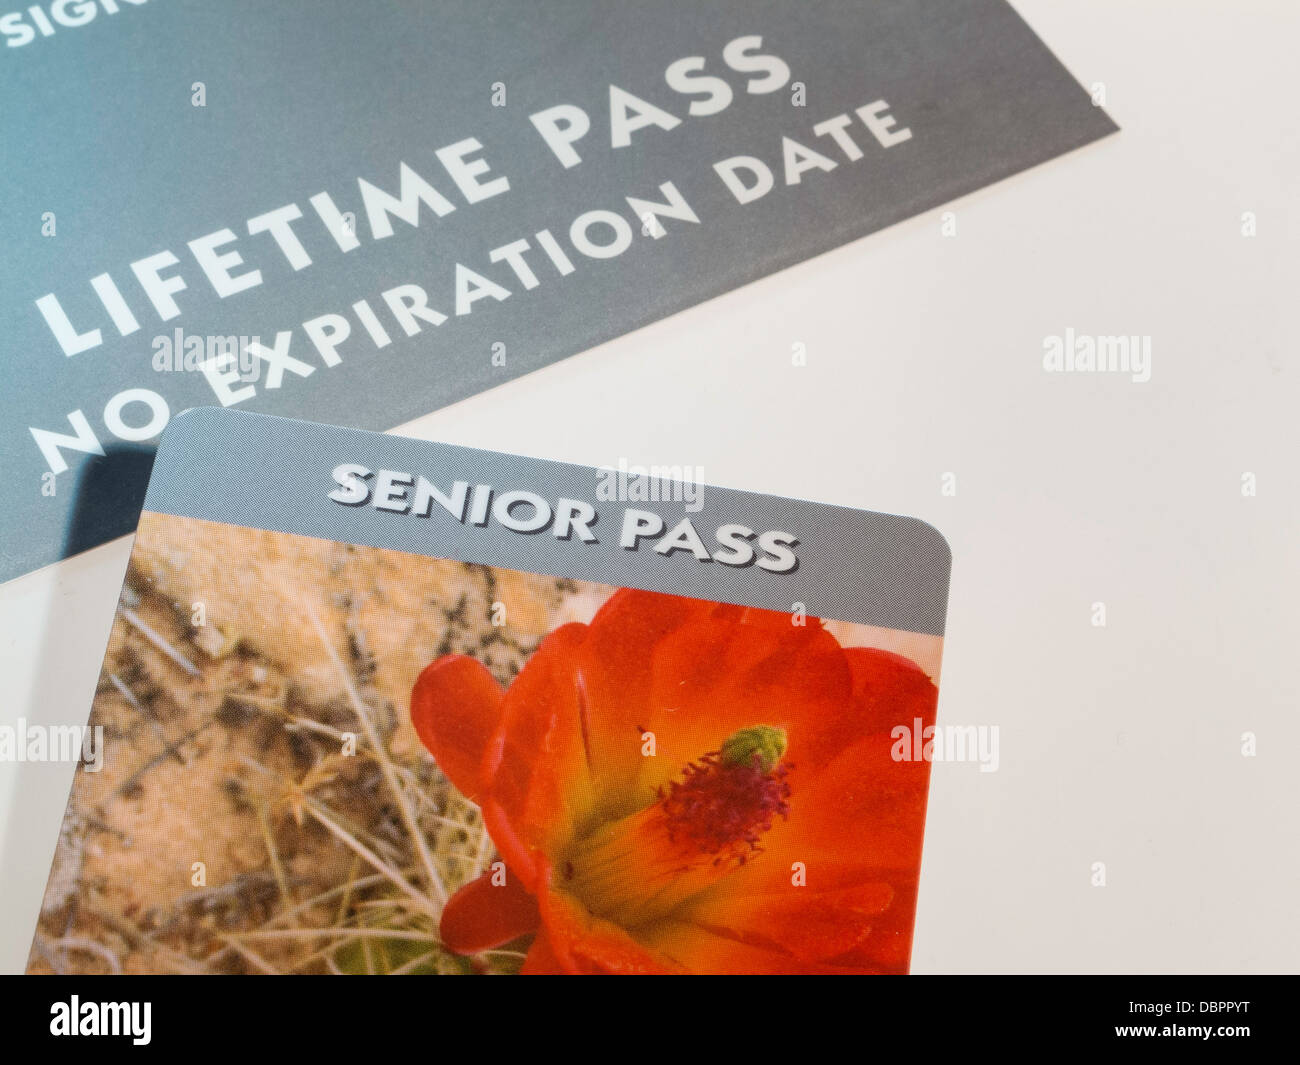 The National Parks and Federal Recreational Lands Senior Access Pass